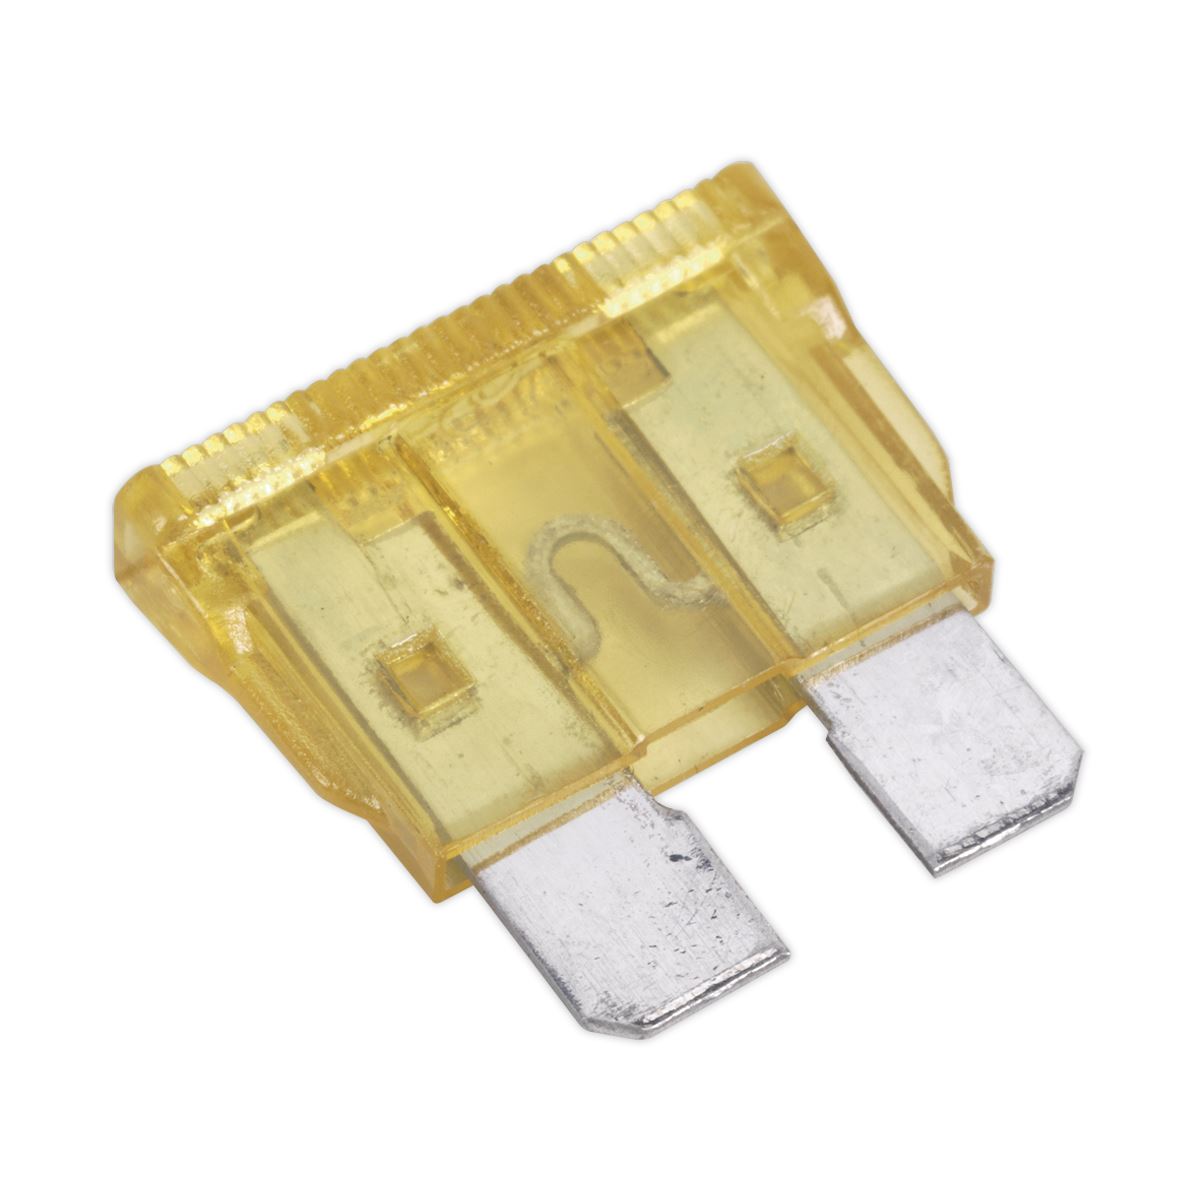 Sealey Standard Blade Fuse 20A Pack of 50